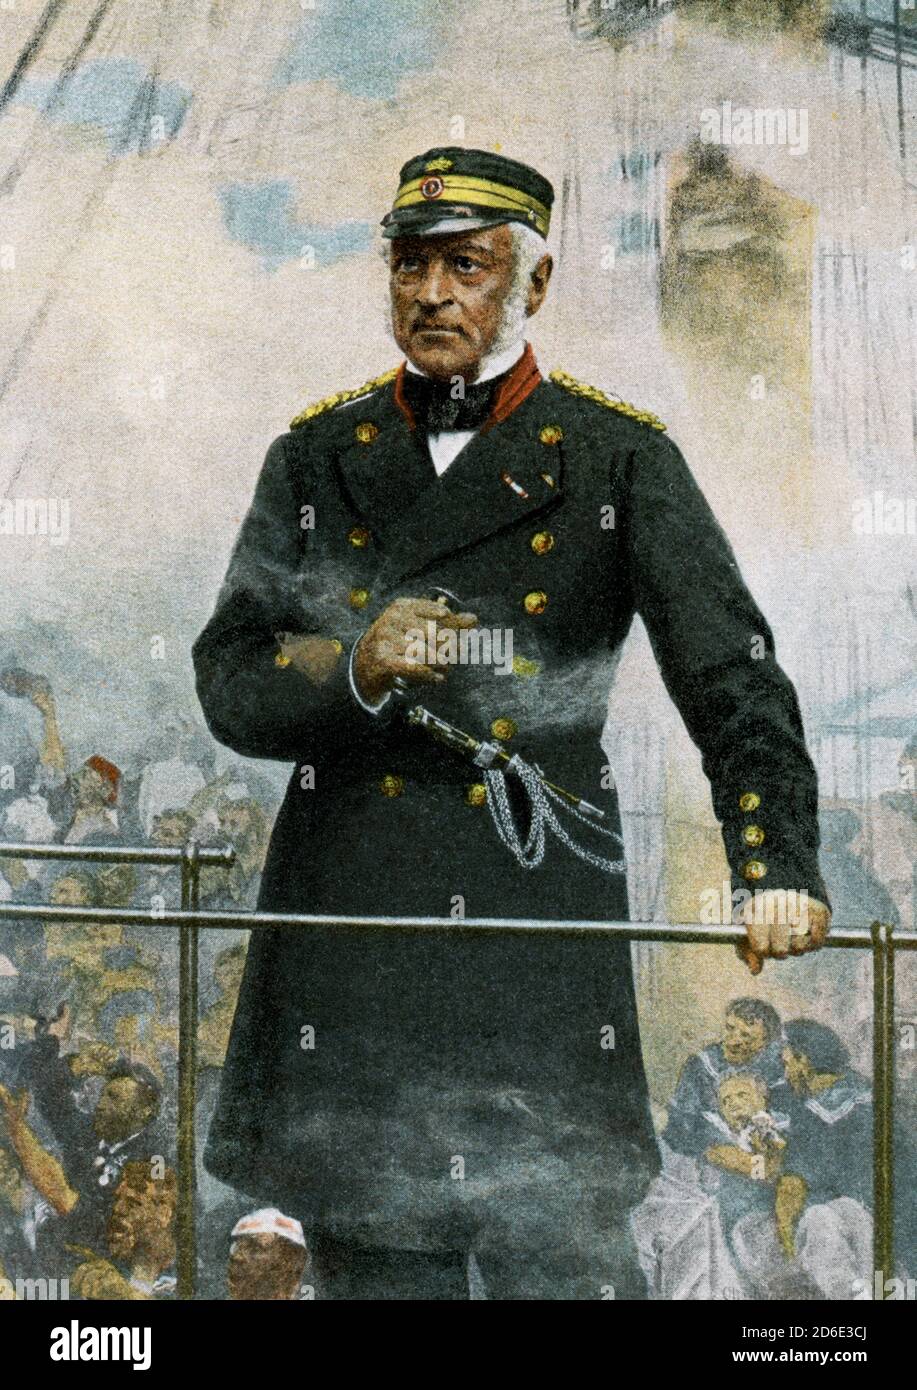 On May 9, 1864, in the North Sea, a Danish squadron defeated the Austrian navy in the Battle of Helgoland (or Heligoland) during the last engagement of wooden warships and the last Danish fleet action. Danish naval commander and vice admiral Edouard Suenson (pictured here in a painting by Otto Bache) defeated an Austro-Prussian naval squadron at this battle during the (Second War of Schleswig. Otto Bache (1839 –1927) was a Danish Realist painter. Many of his works depict key events in Danish history. Stock Photo